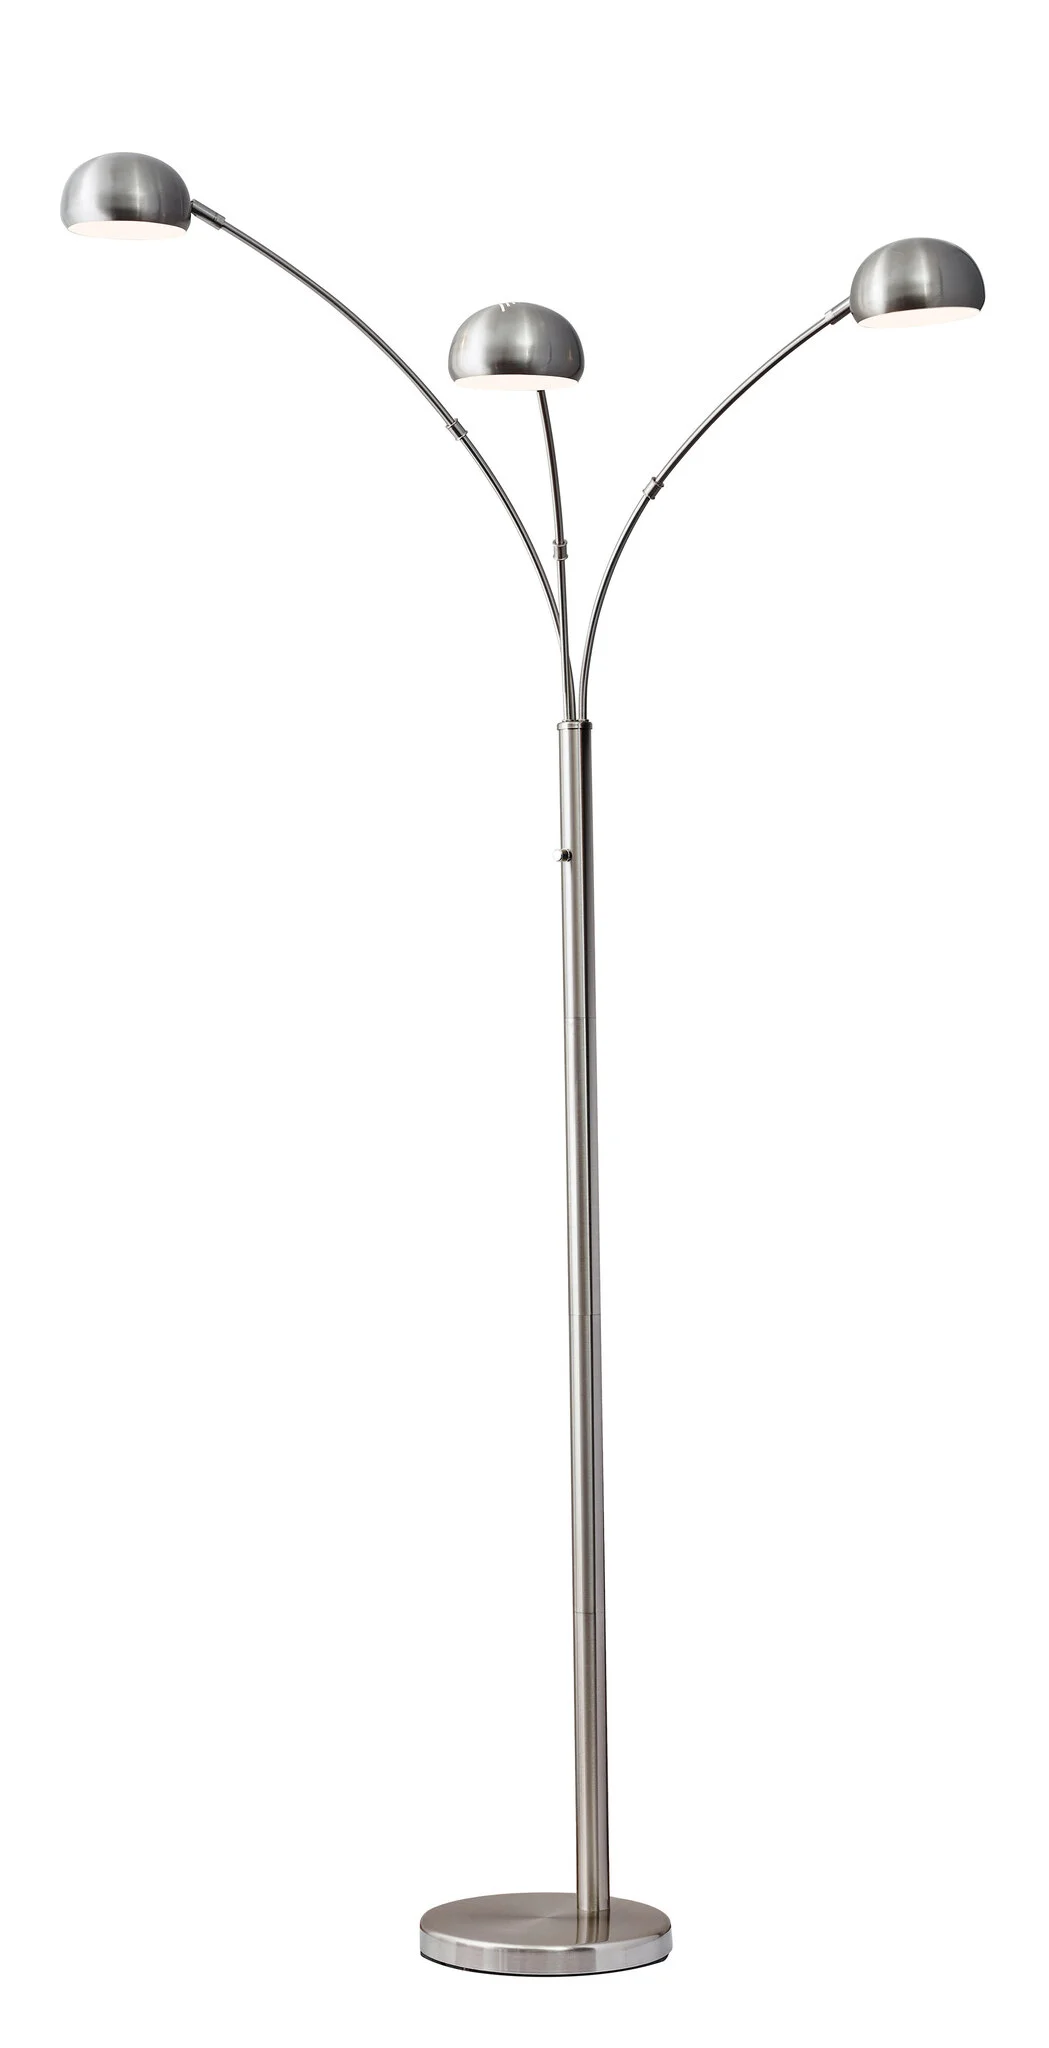 84" Steel Three Light Tree Floor Lamp With Silver Metal Bell Shades